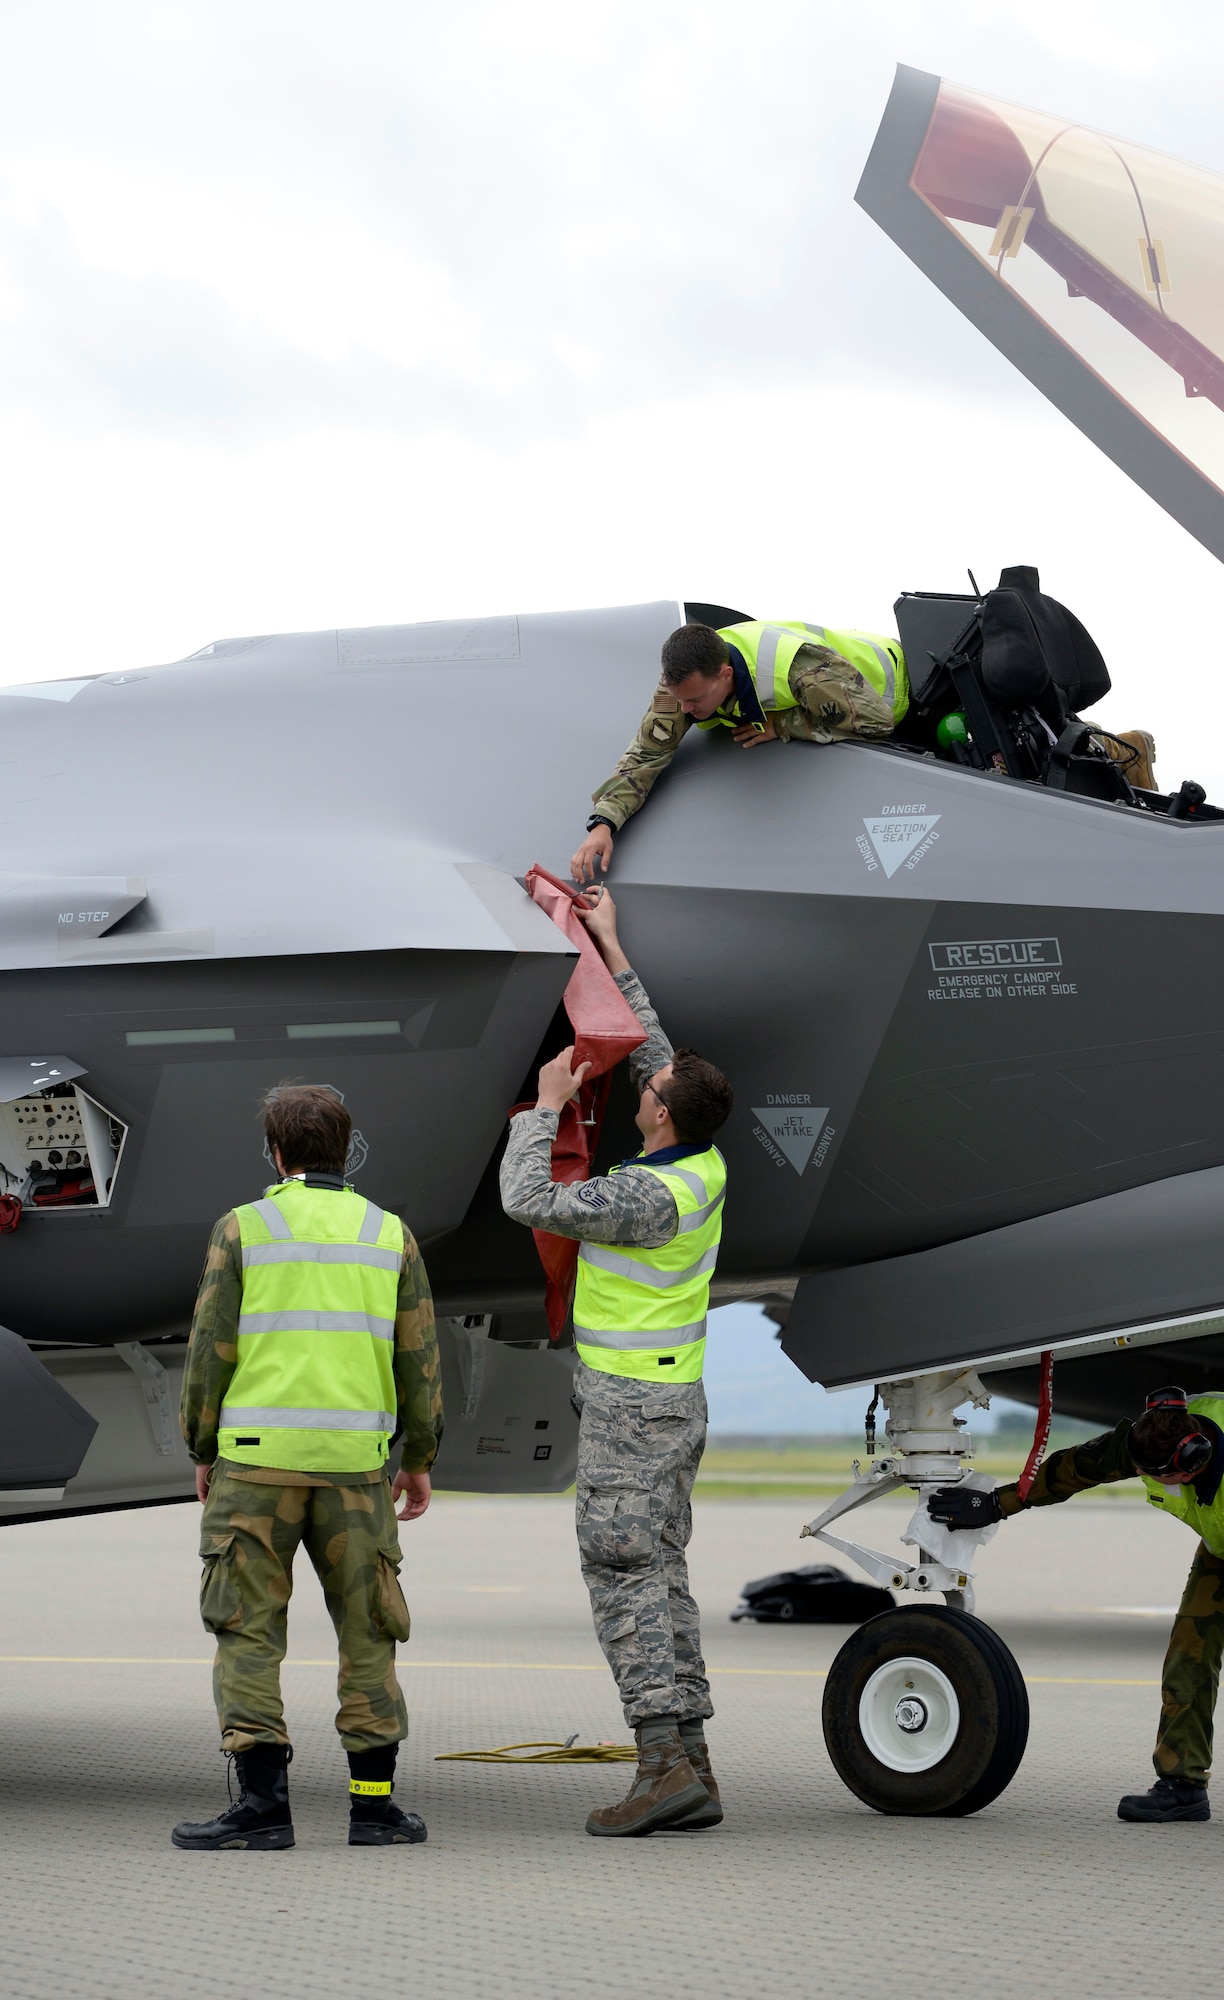 F-35 Lighting II maintainers from both the United States Air Force and Royal Norwegian Air Force work together at Orland Air Base, Norway, to turn two American jets after a sortie June 17, 2019. The visit marked the first time American F-35s have landed in Norway, which operates its own fleet of the fifth-generation fighters, and served as valuable training for the Norwegian maintainers. A fleet of F-35s is currently deployed to Europe as part of the European Deterrence Initiative, as as a way of proving the U.S. Air Force's ability to rapidly deploy fifth-generation fighters to European bases. (U.S. Air Force photo by Master Sgt. Austin M. May.)